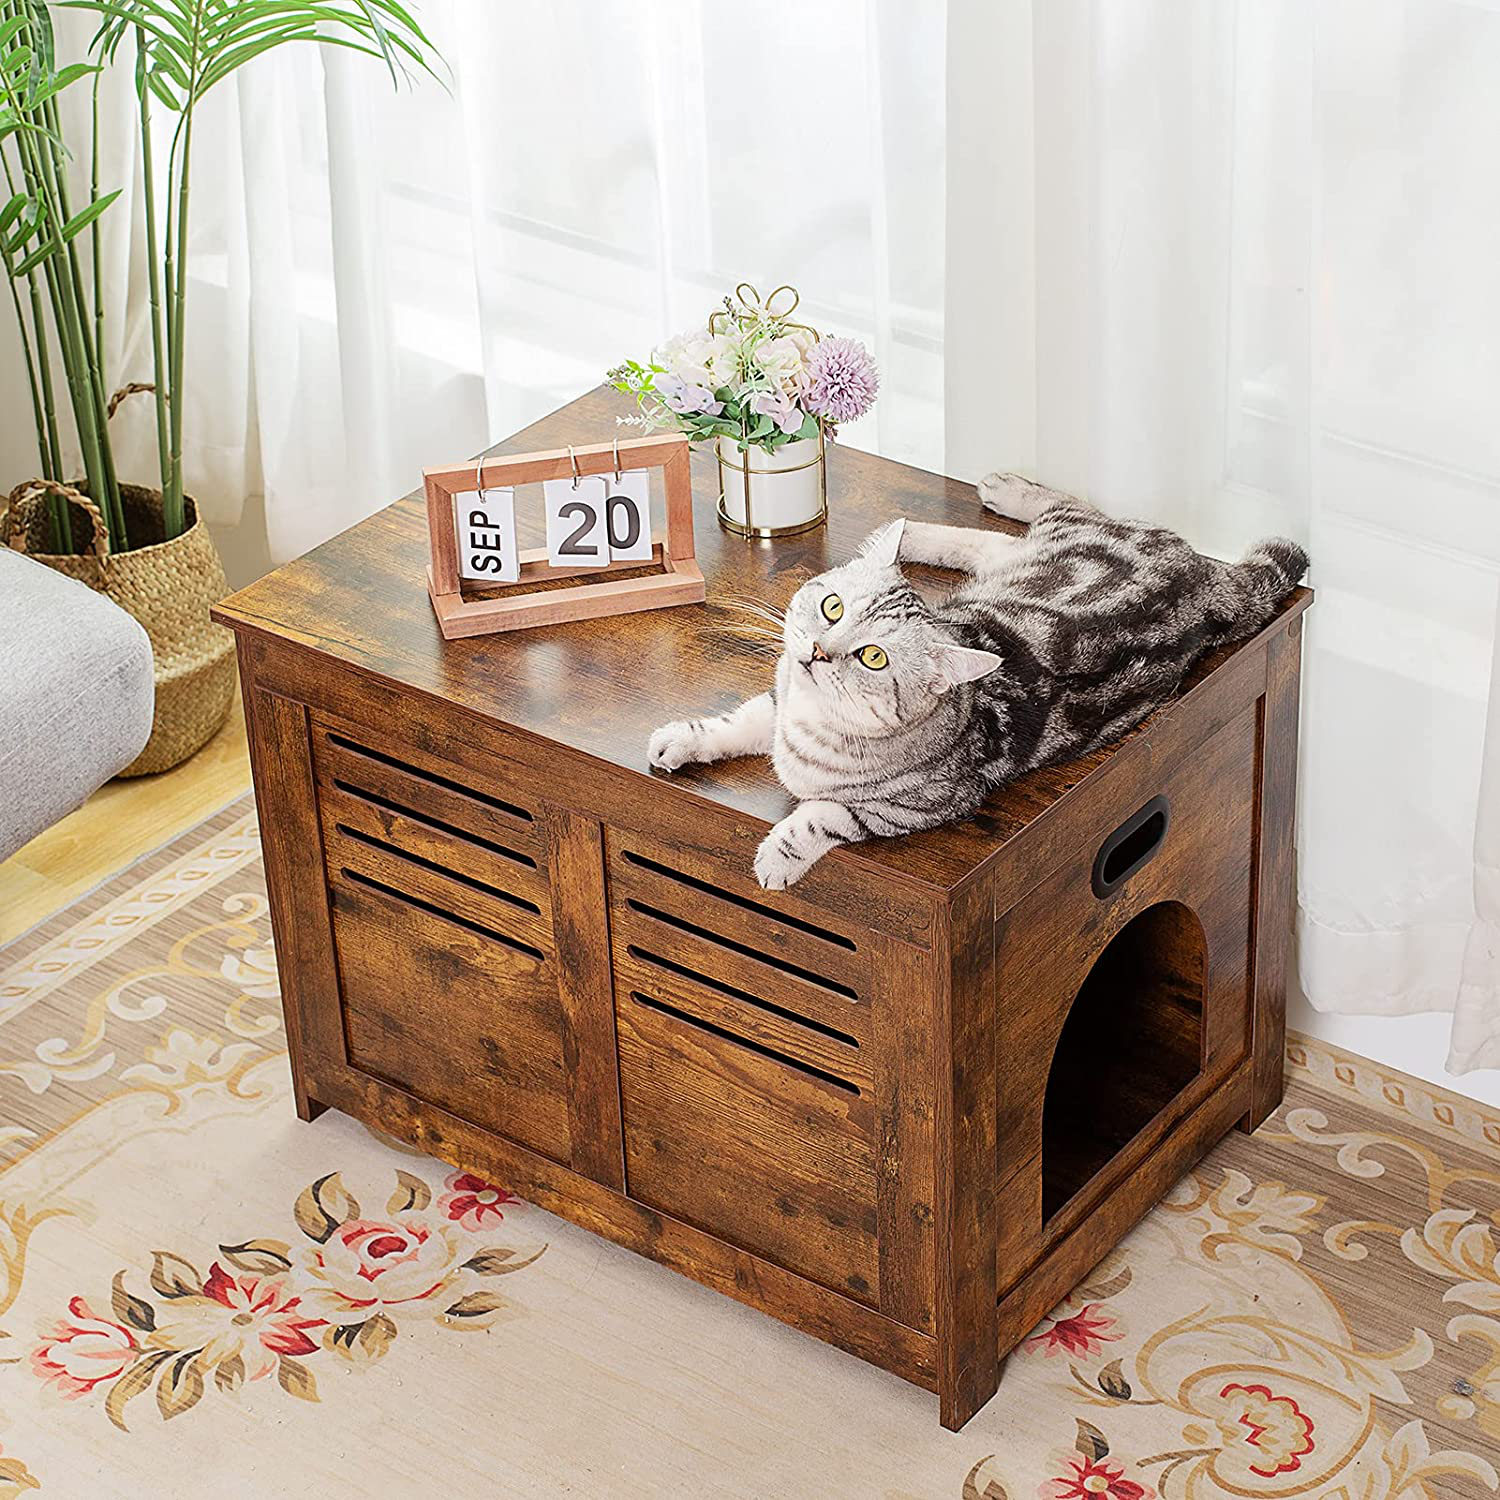 DINZI LVJ Litter Box Enclosure, Cat Litter House with Louvered Doors,  Entrance Can Be on Left or Right Side, Spacious Hidden Washroom for Most of